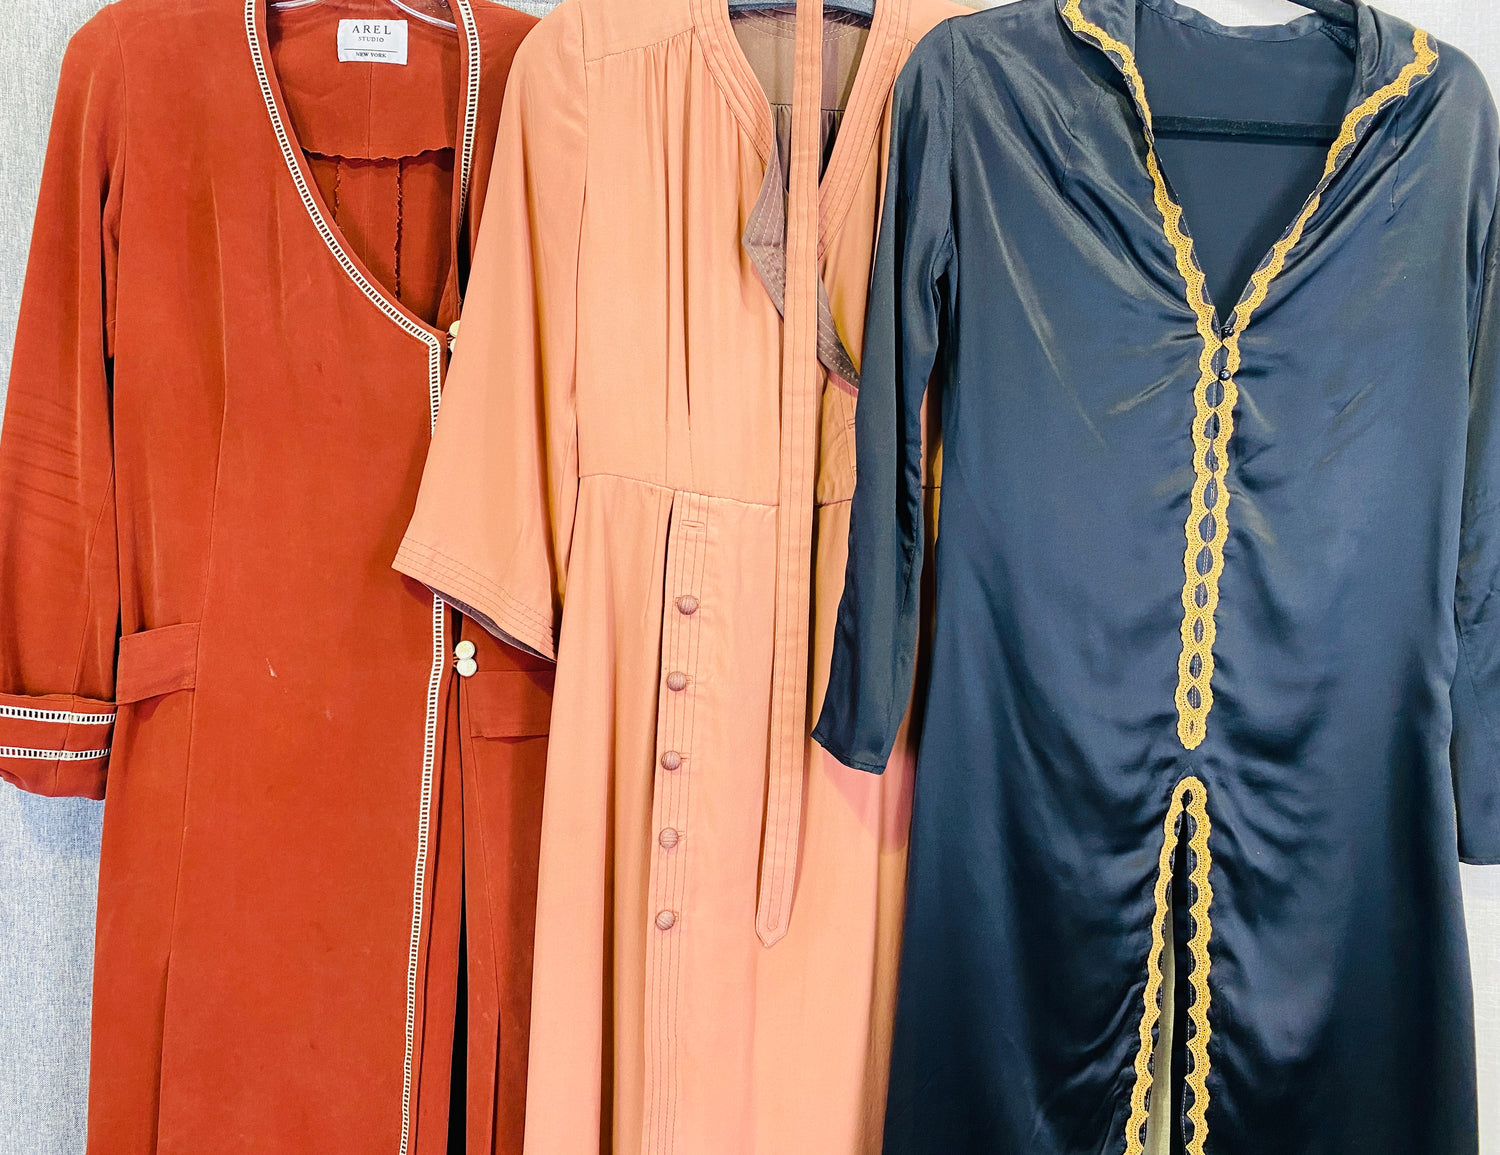 Reproduction 1930s womens dresses from Damnation TV series 